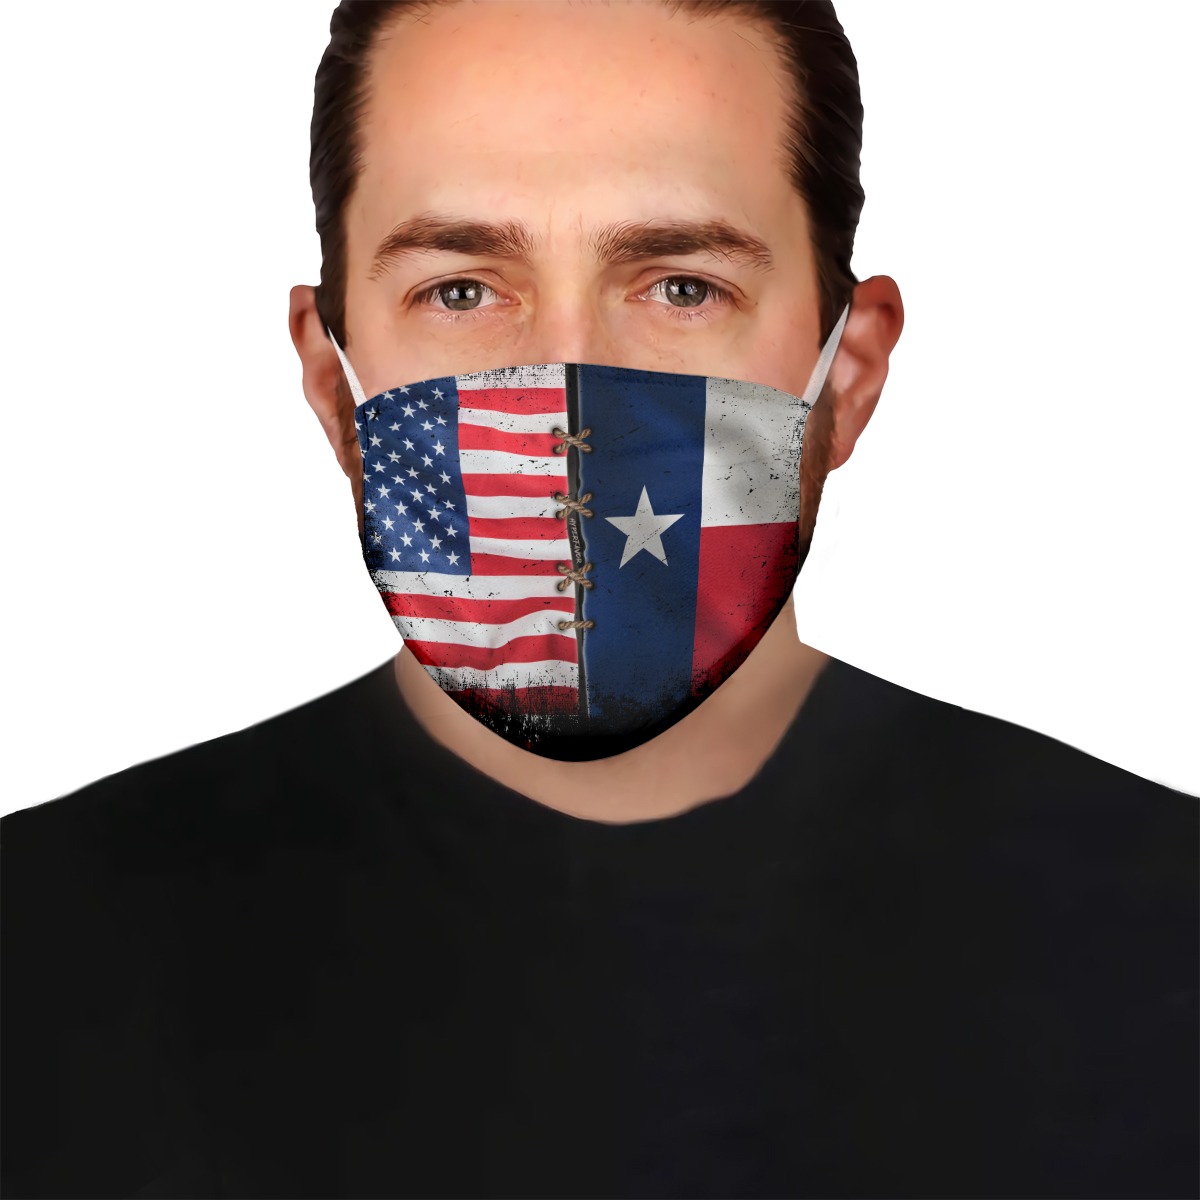 Texas American flag face mask - pic 1